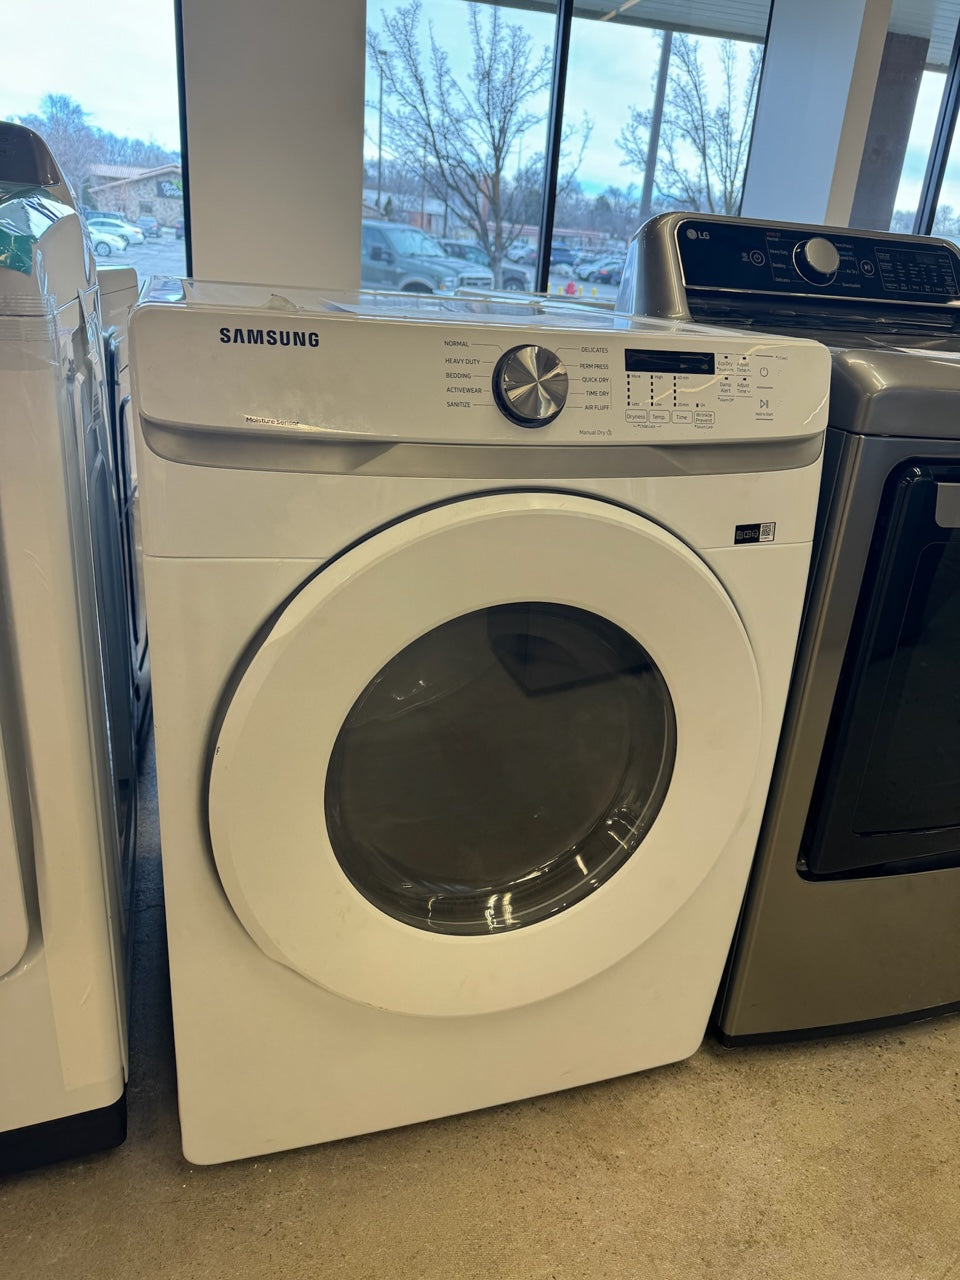 Stackable Electric Dryer with Sensor Dry - White  MODEL: DVE45T6000W  DRY10013R